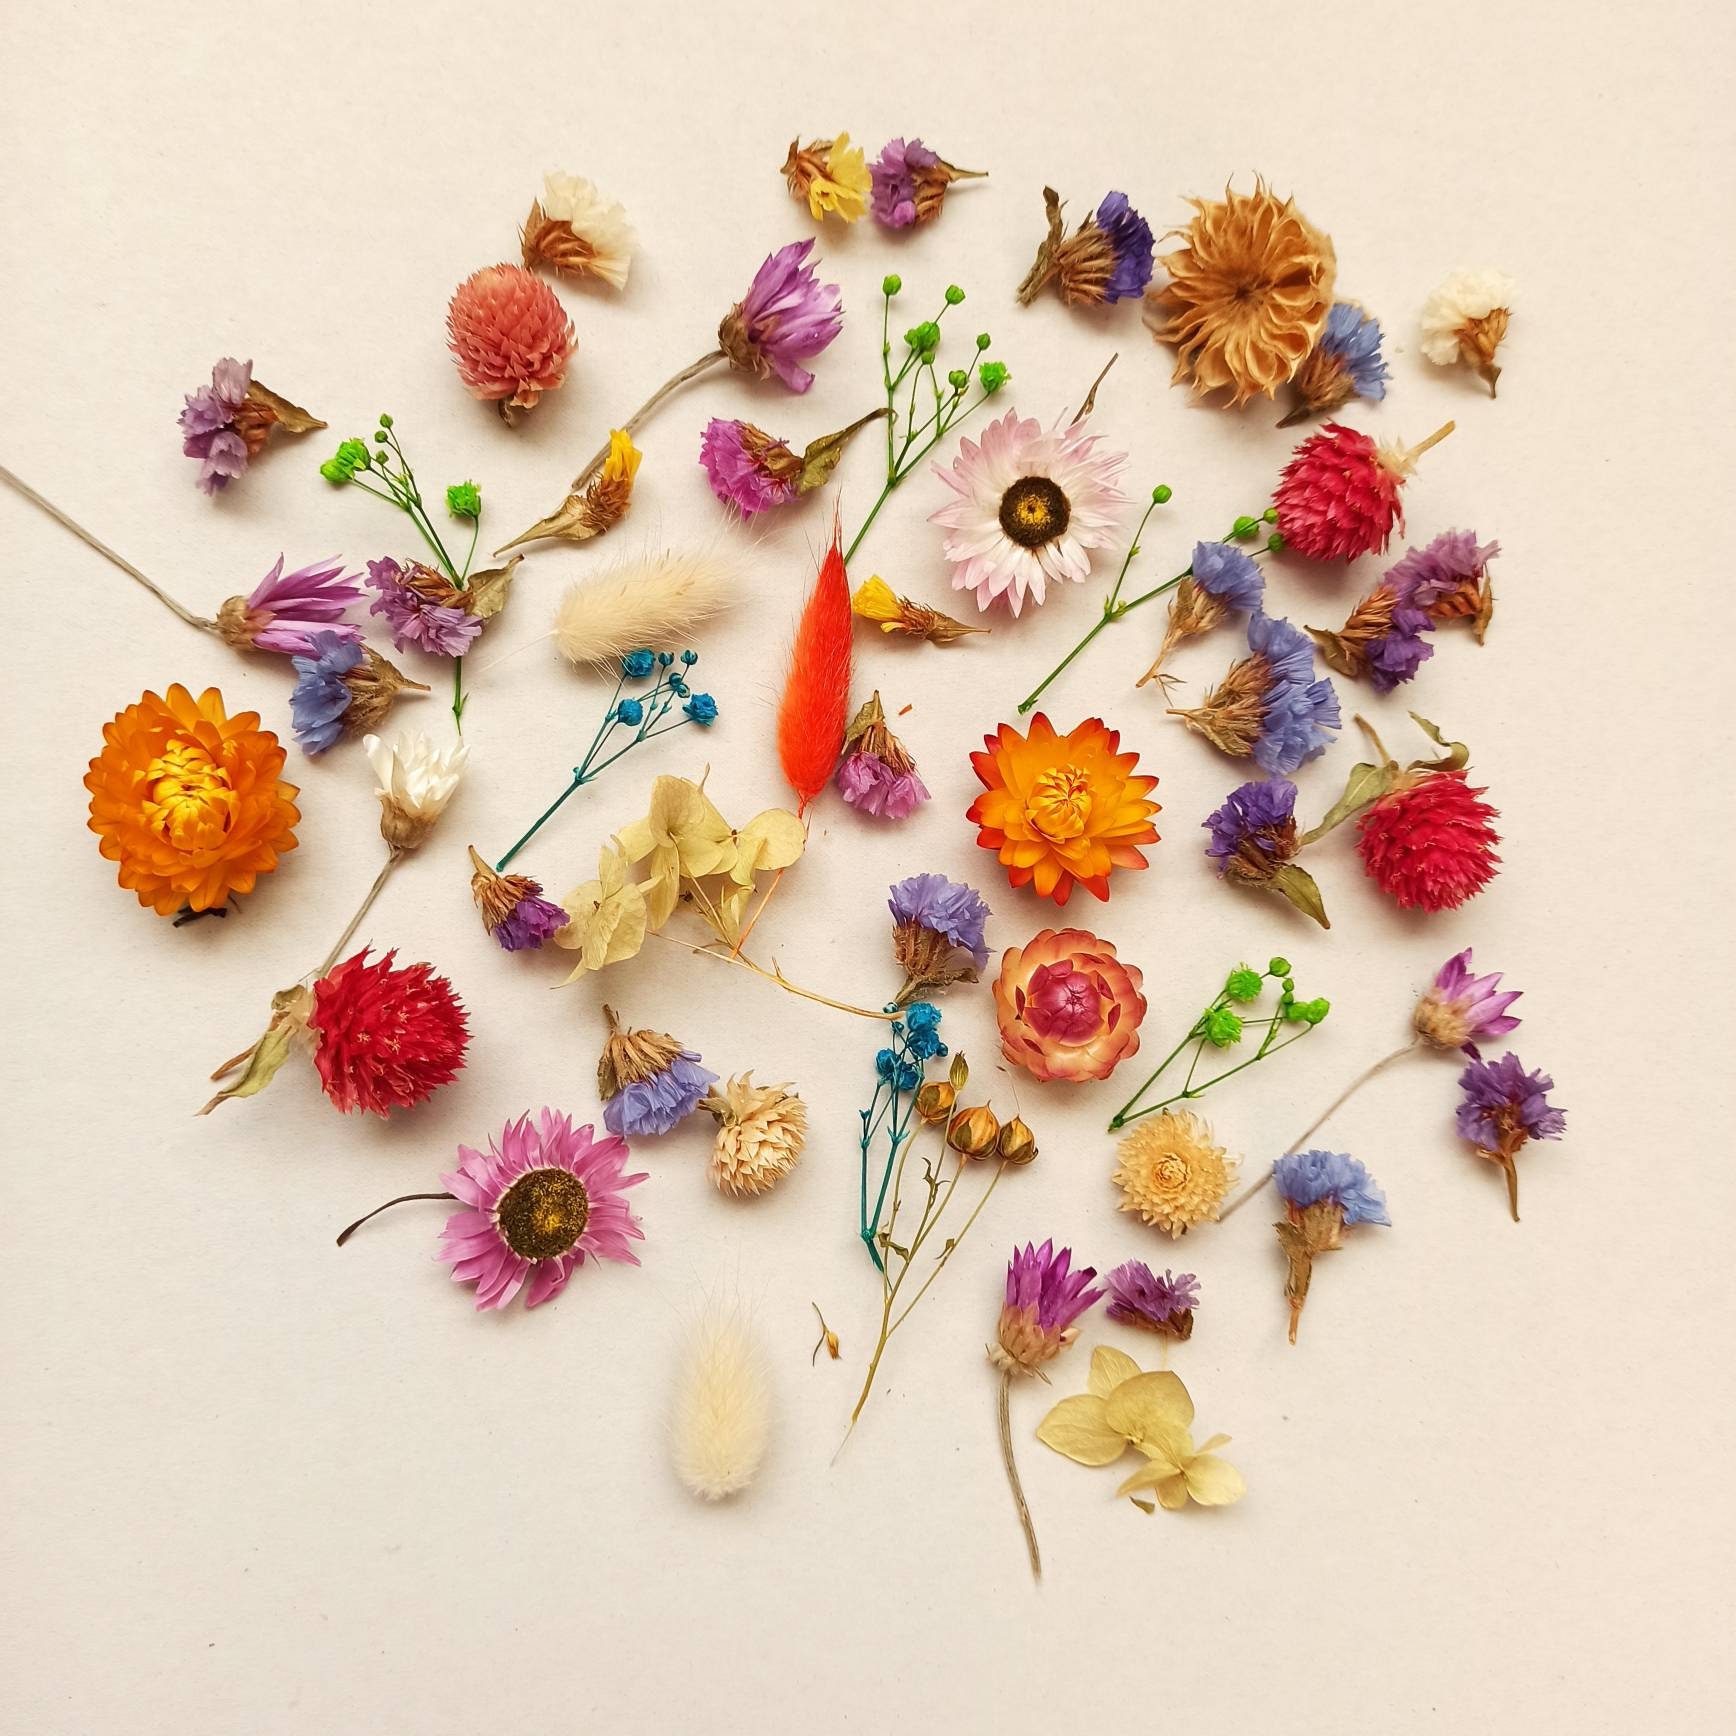 Dried Pressed Flowers For Crafts - Pressed Flowers Mix Pack - Dry Pressed  Flower Art - Dried Real Flowers - Card Making - 145x106mm -HM1027A